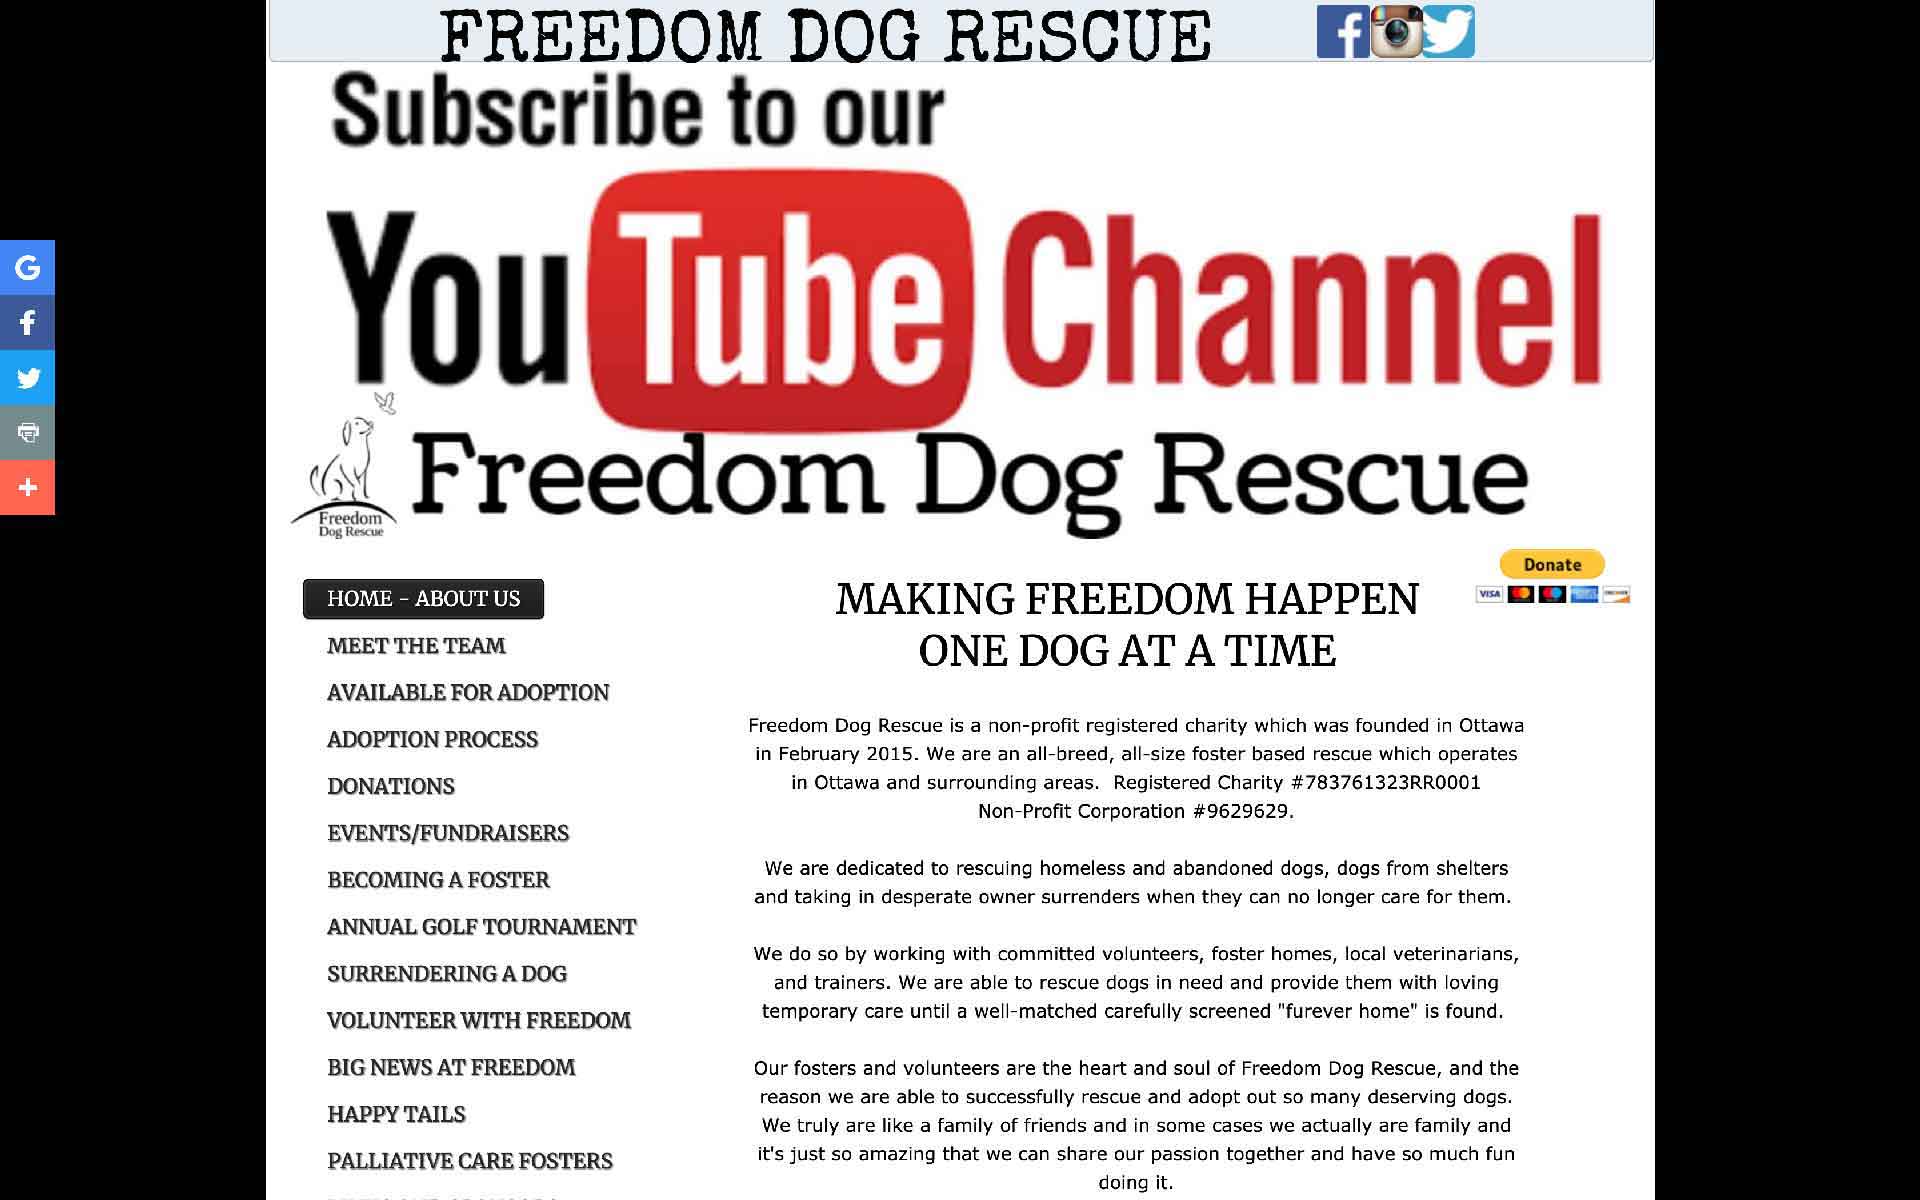 An original image of the Freedom Dog Rescue website… painful.